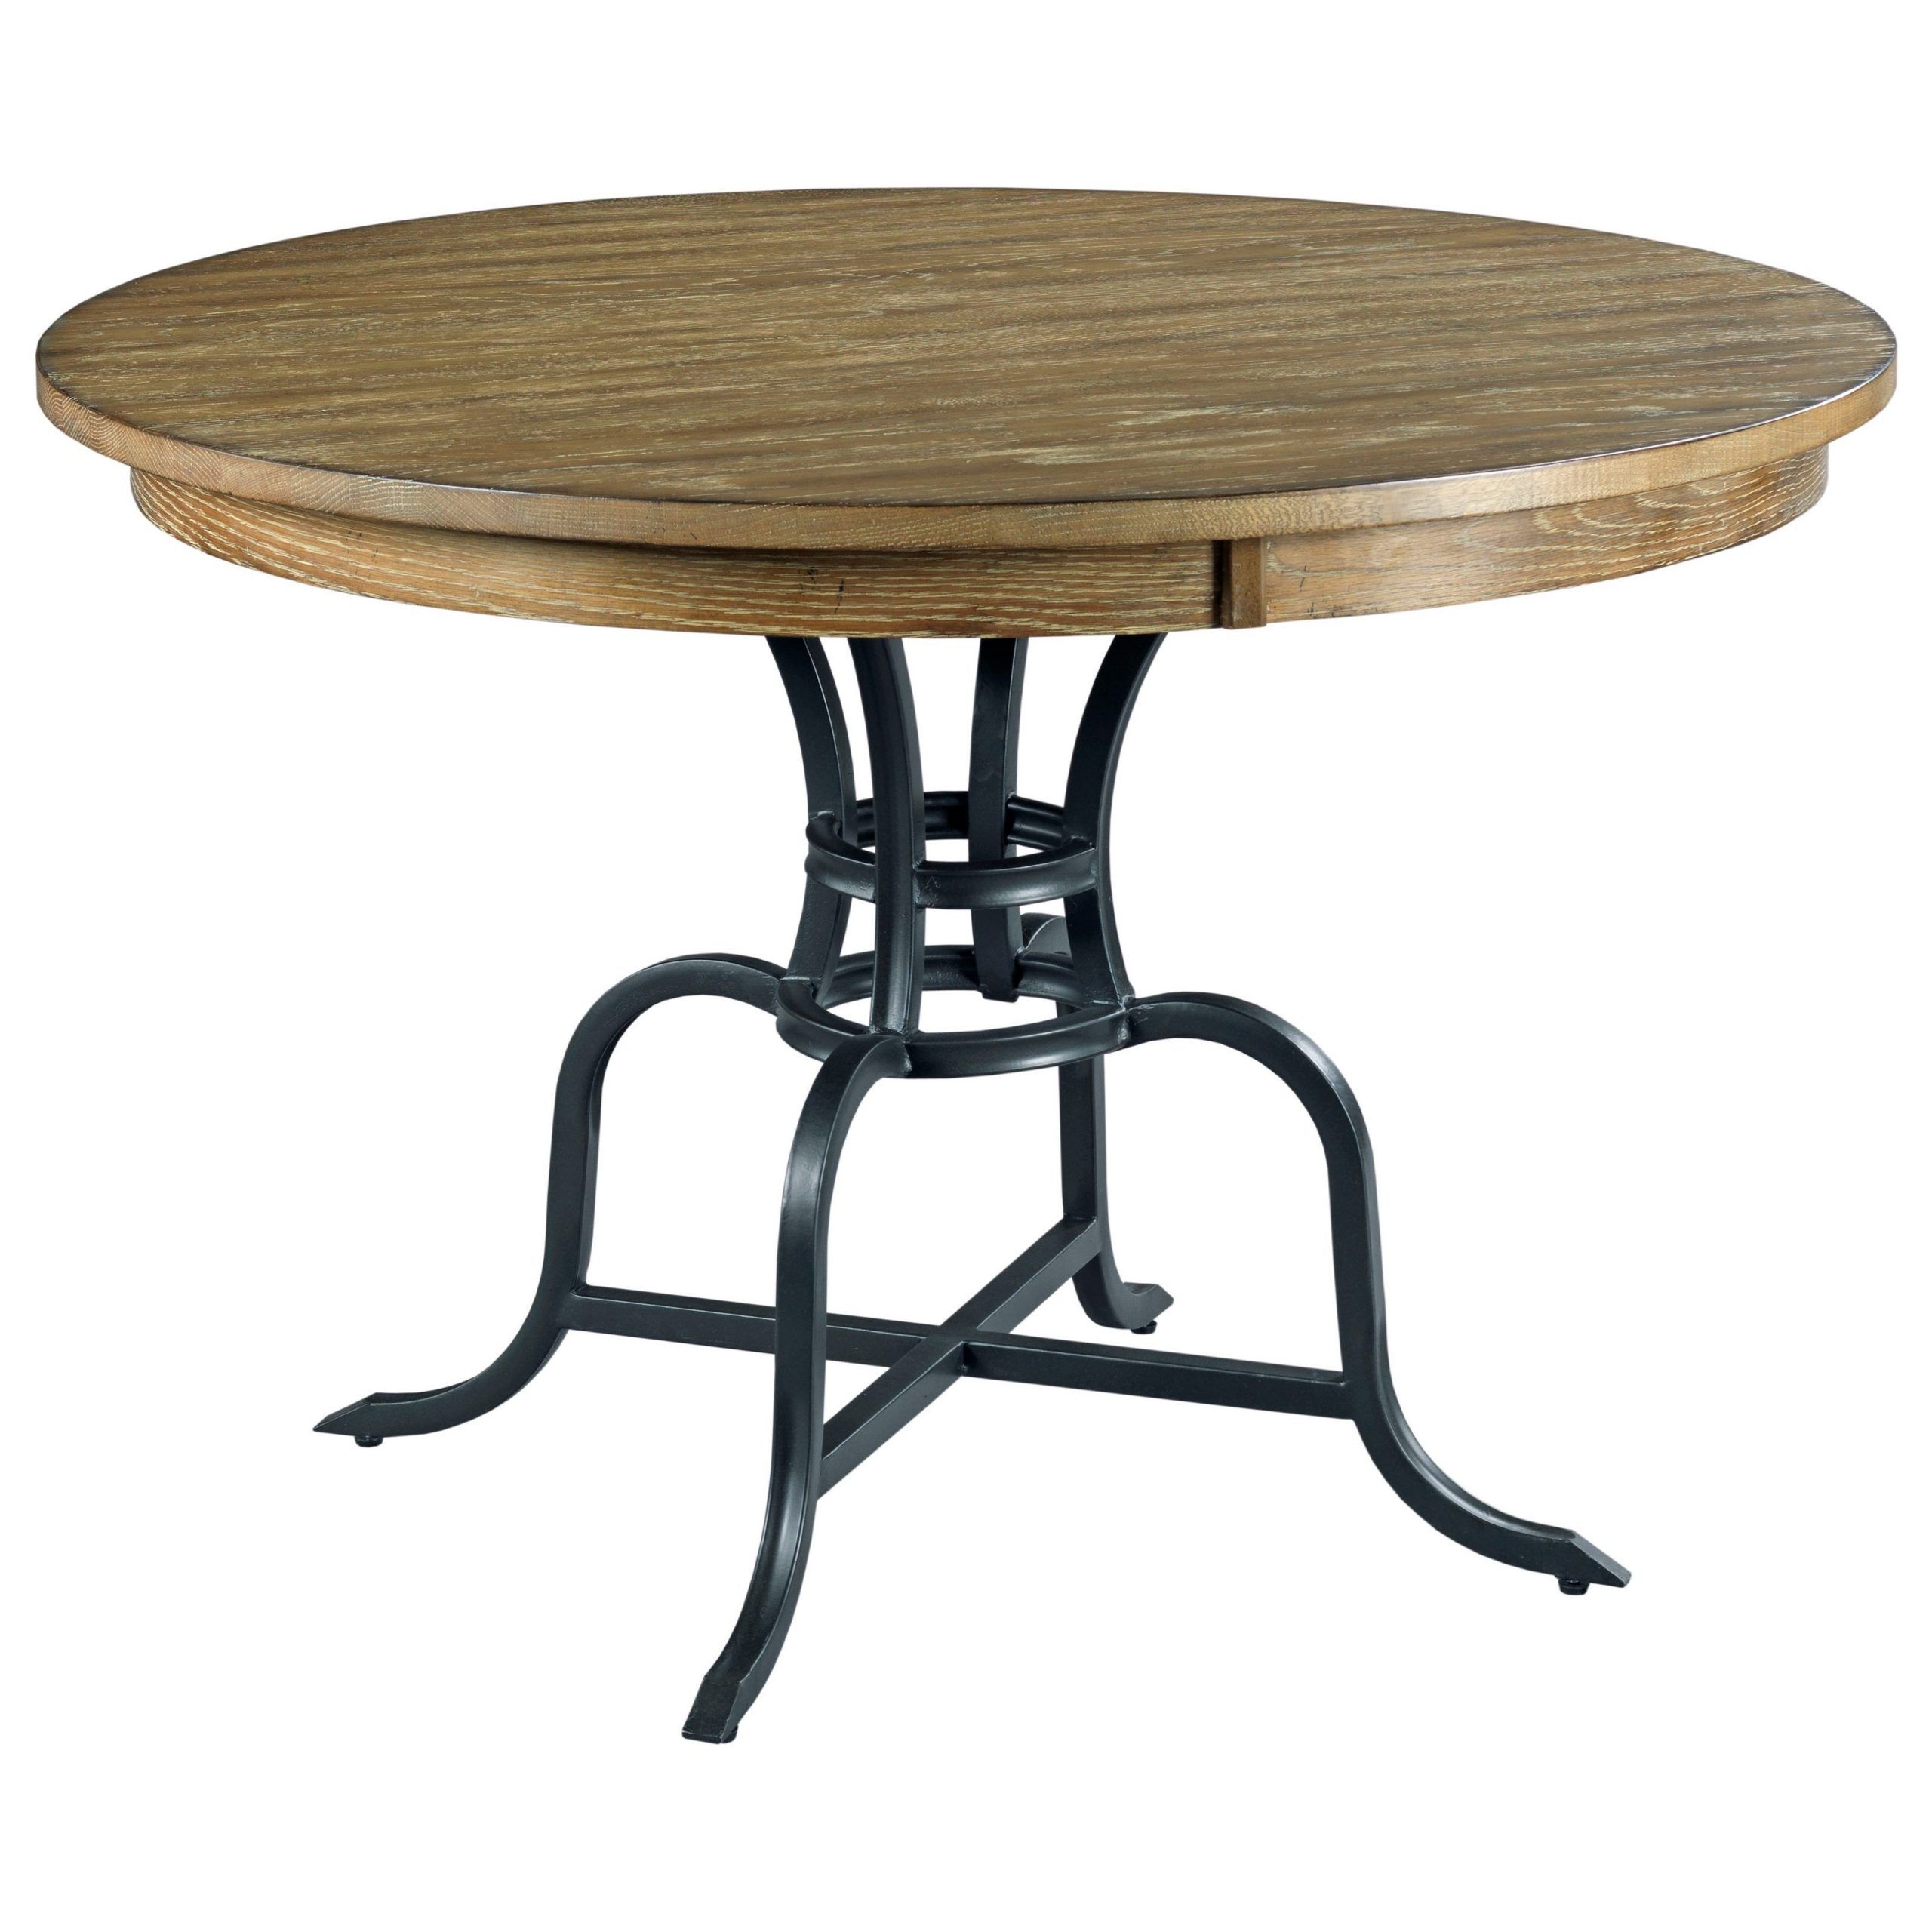 Kincaid Furniture The Nook 44" Round Solid Wood Dining With Metal Legs And Oak Top Round Console Tables (View 7 of 20)